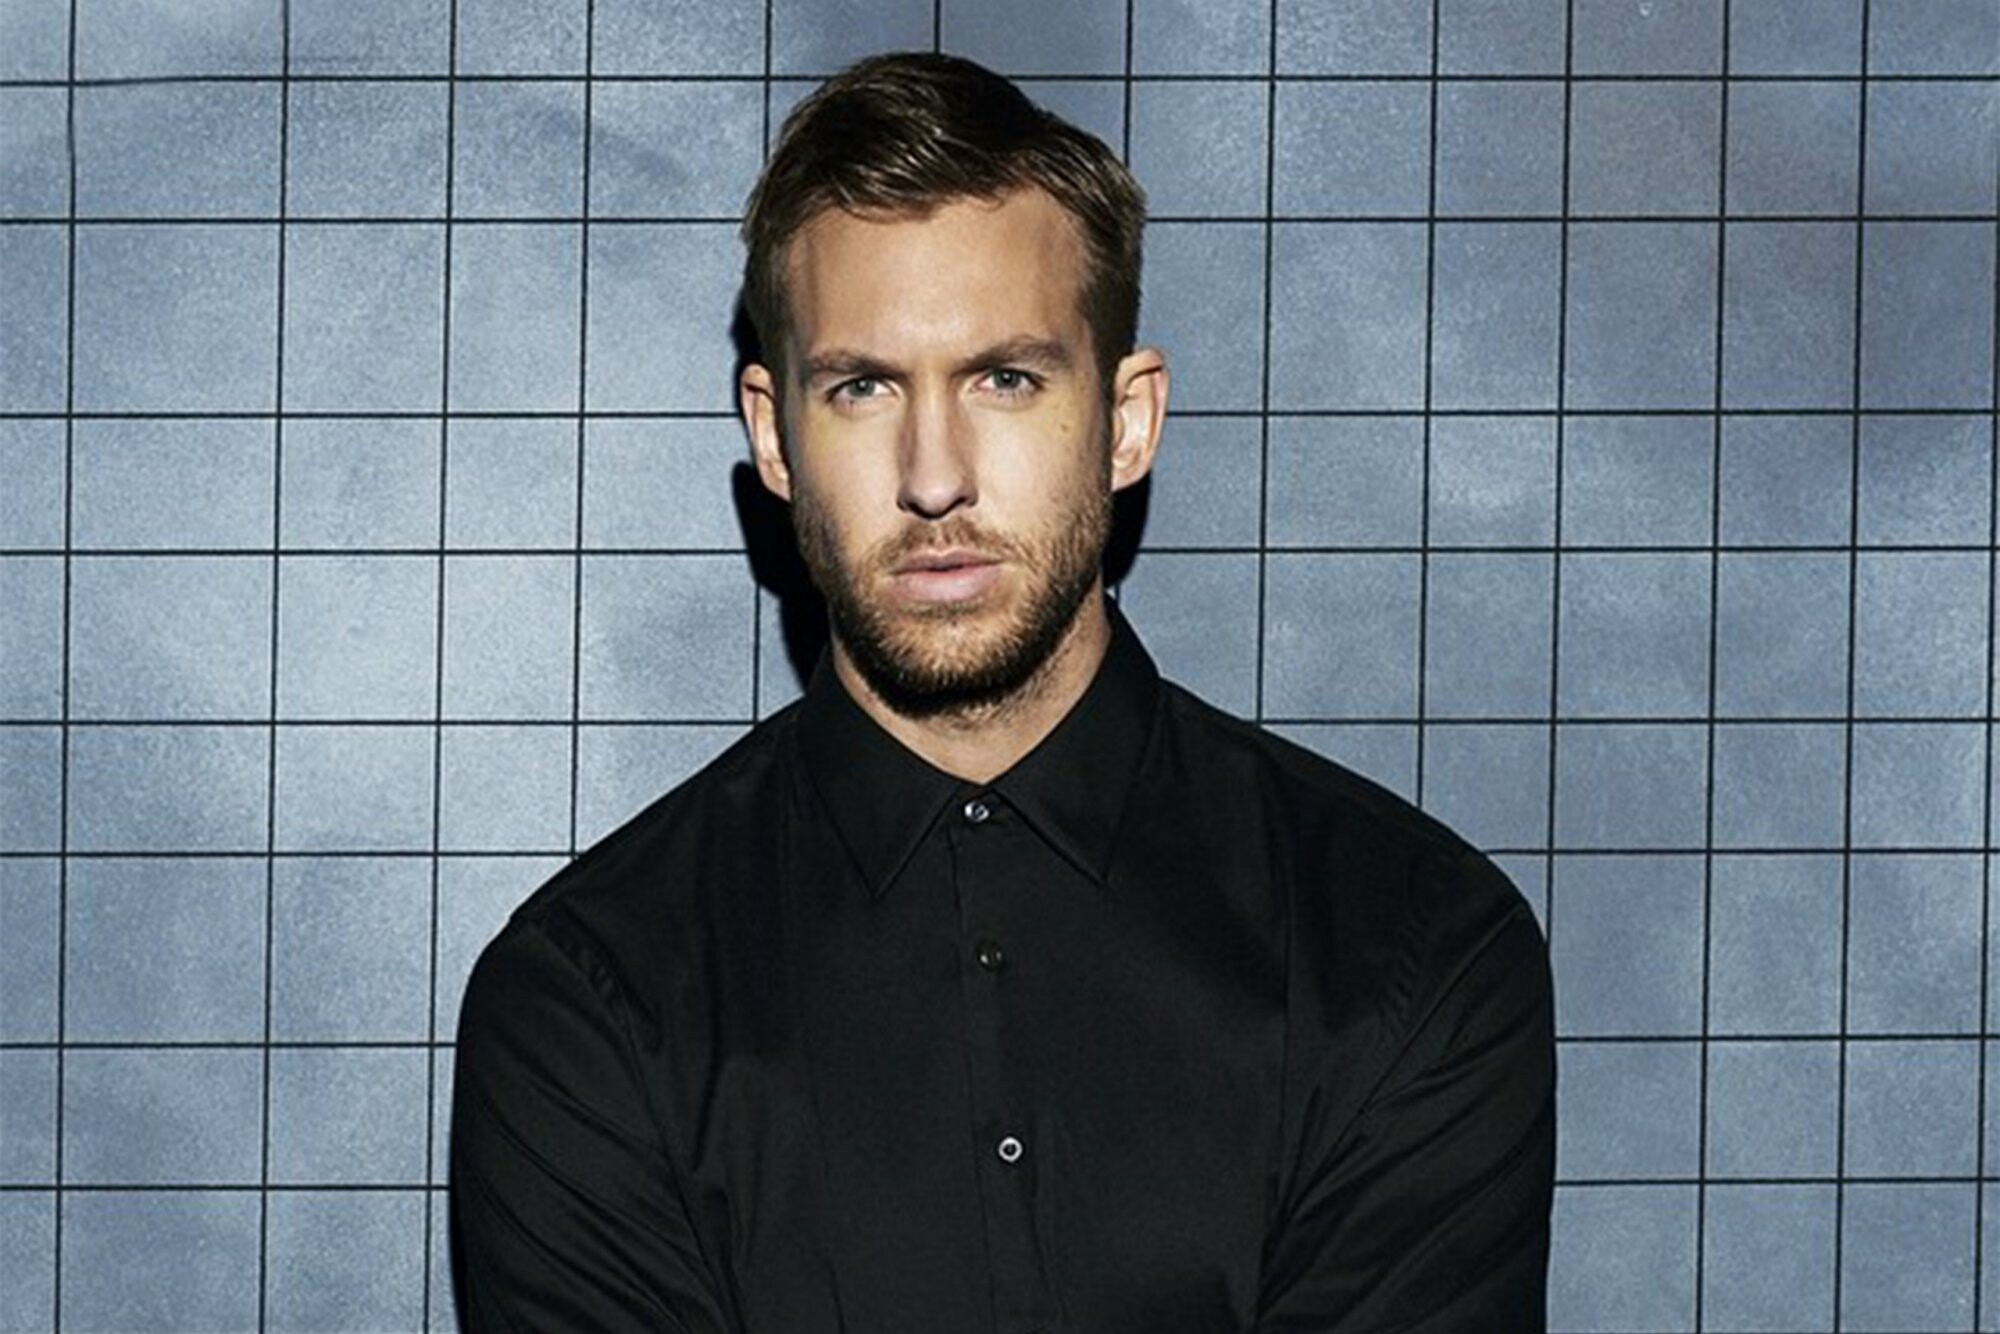 HD wallpaper, Desktop Hd Calvin Harris Wallpaper, 2000X1340 Hd Desktop, Music Wallpapers, Calvin Harris, High Quality Pictures, Exciting Visuals